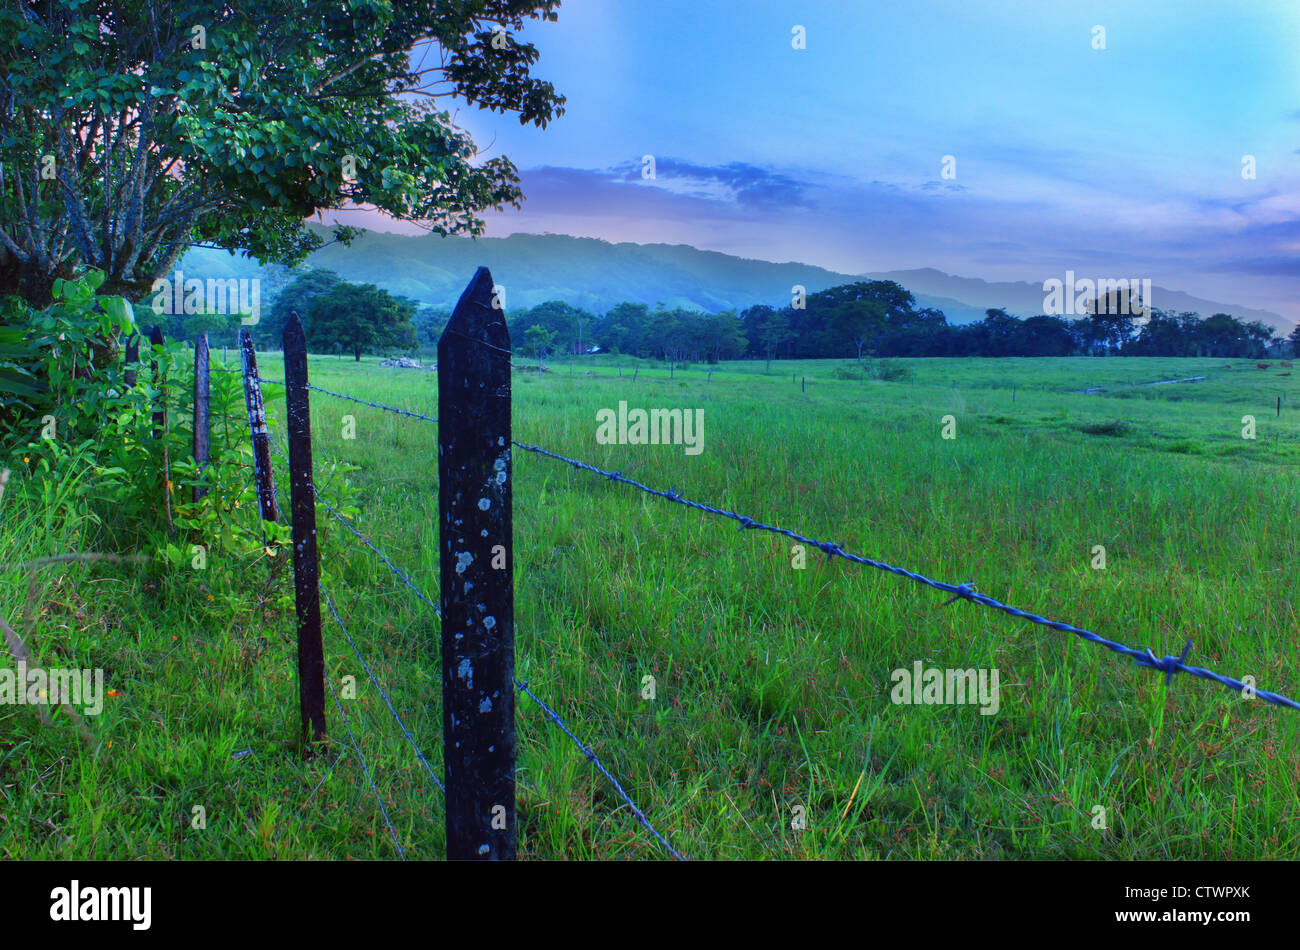 Summer pasture with fence and evening sky, mountains. Stock Photo